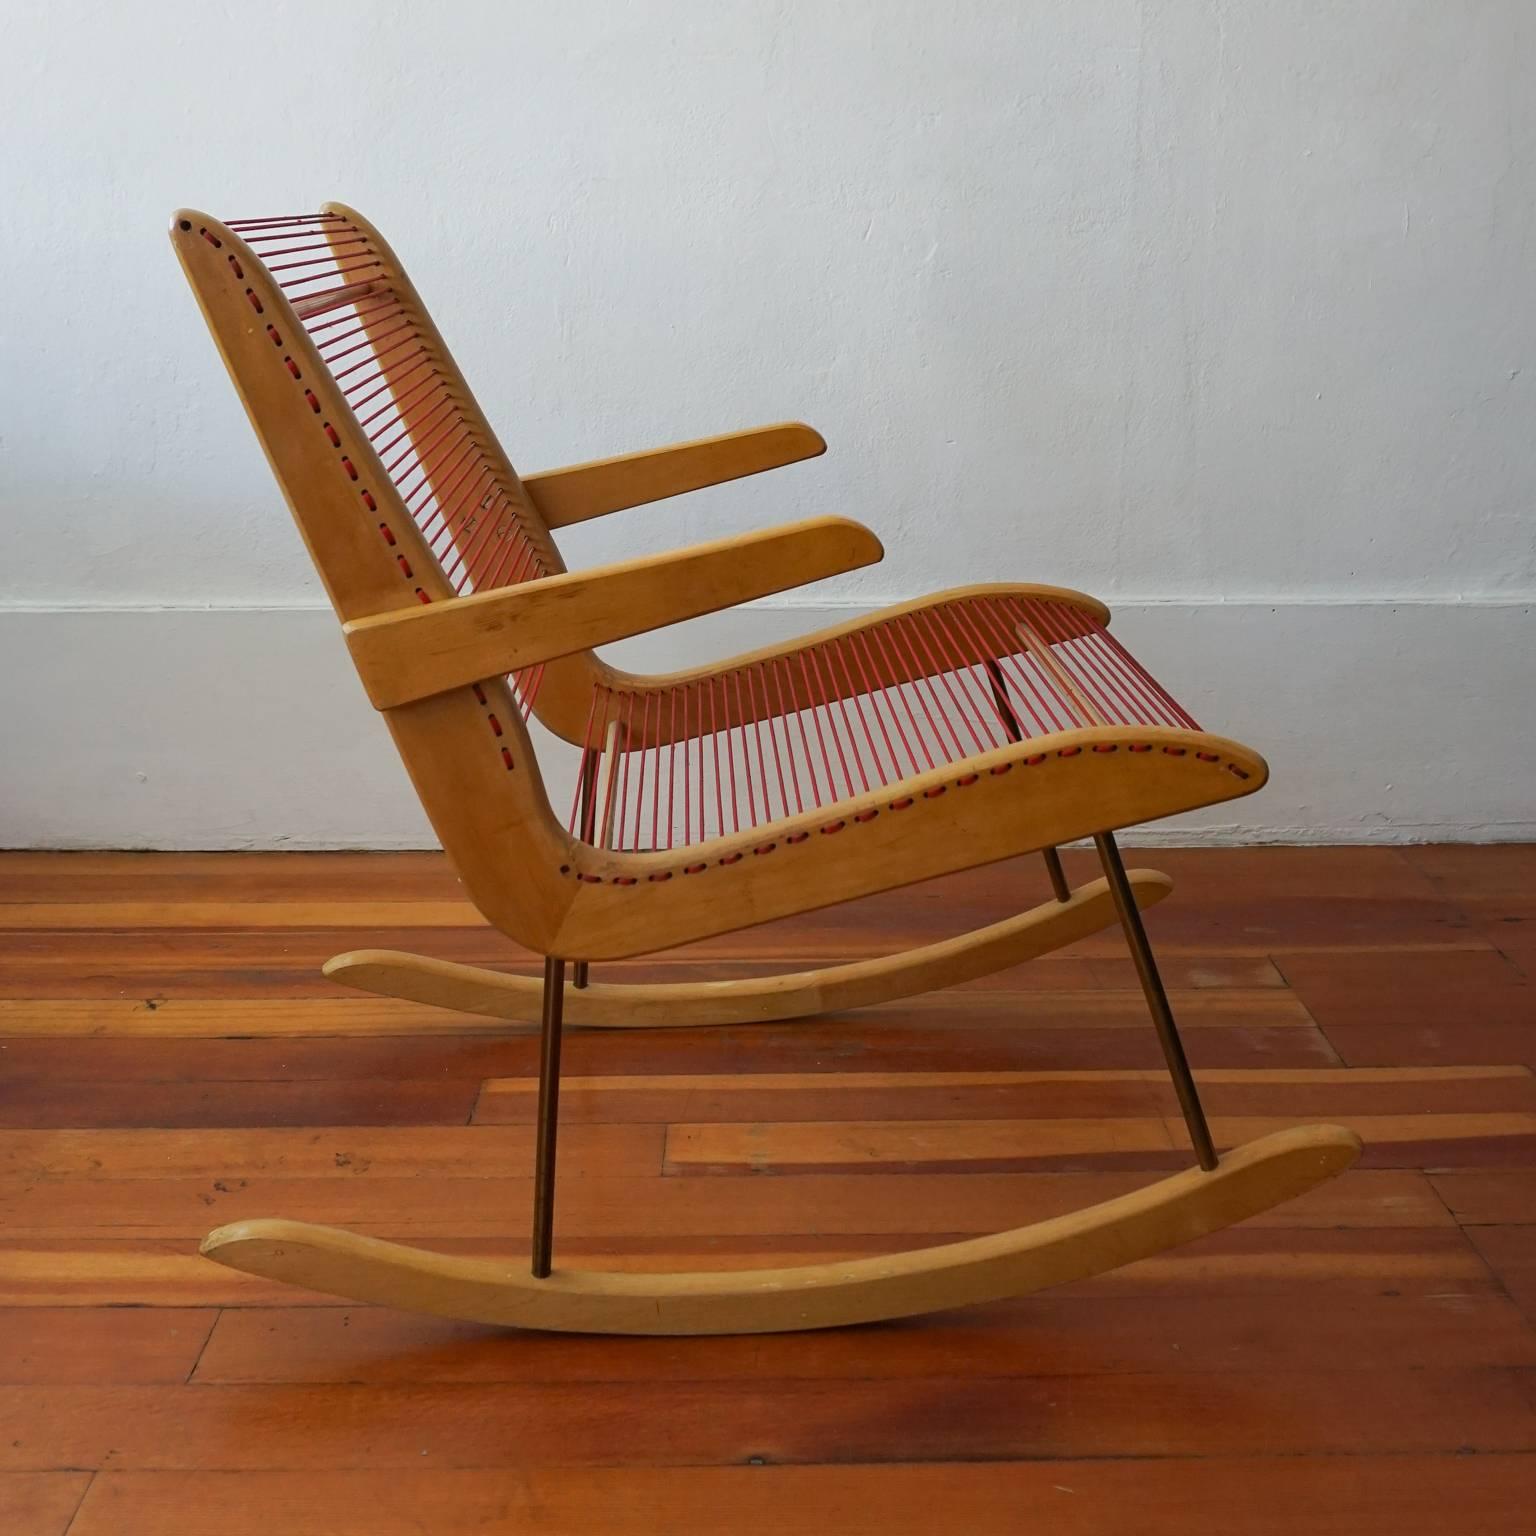 Modernist string rocking chair by Carl Koch for Tubbs of Vermont. Great Minimalist design by the Bostson architect. Simple wood frame, red nylon cord, and brass legs. Early 1950s.